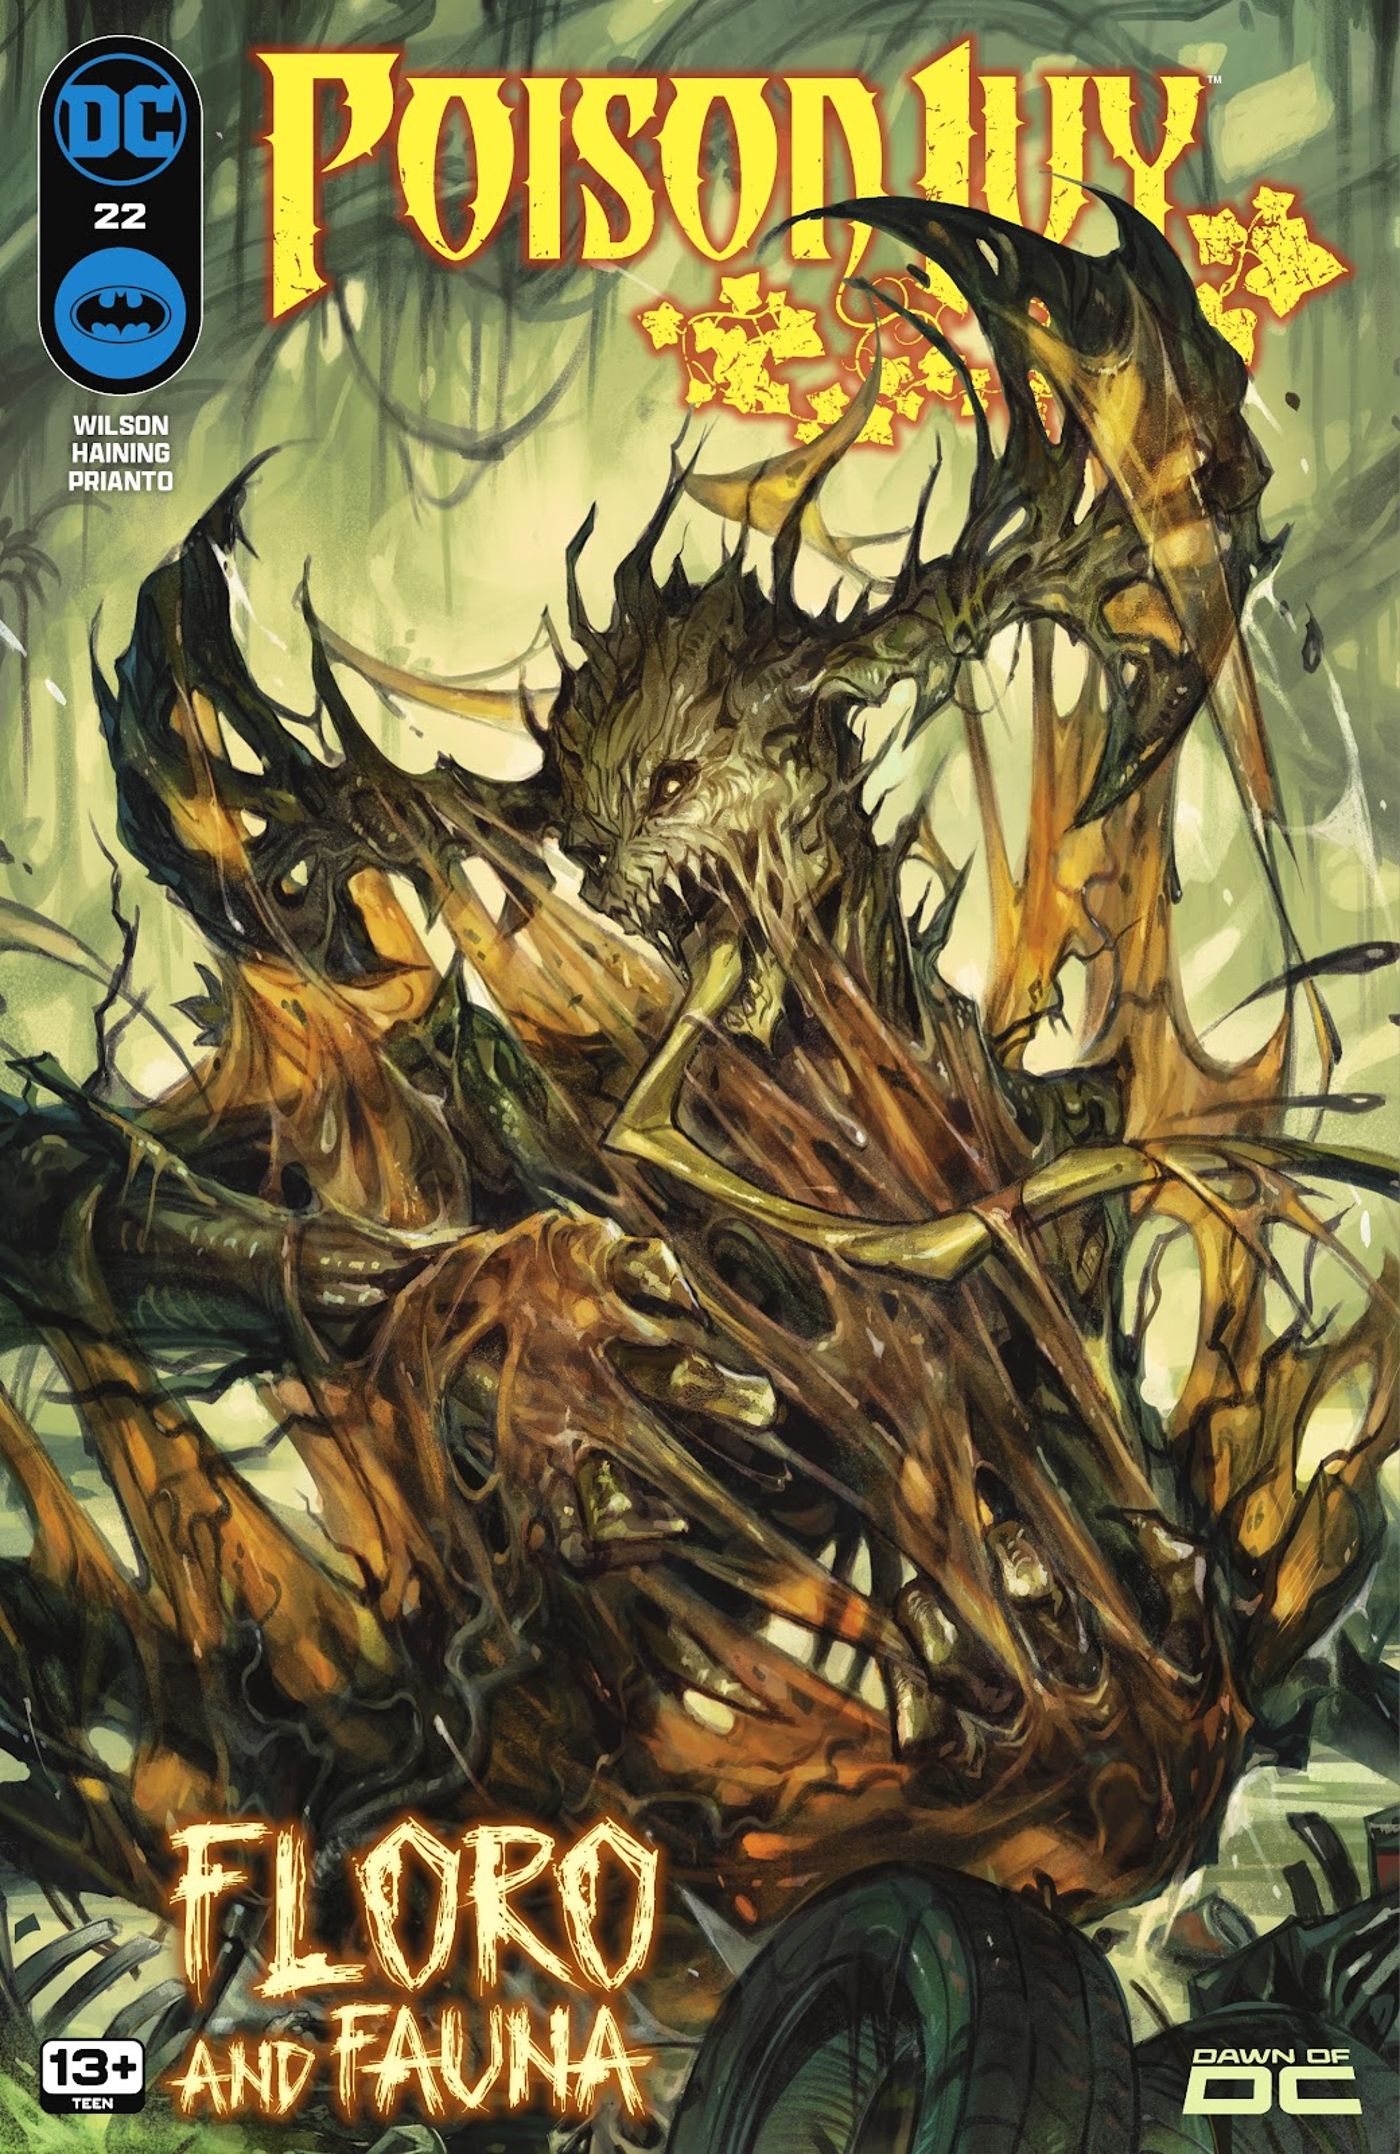 Poison Ivy 22 Main Cover: Jason Woodrue aka the Floronic Man appears as a massive tree-like creature with fangs. 